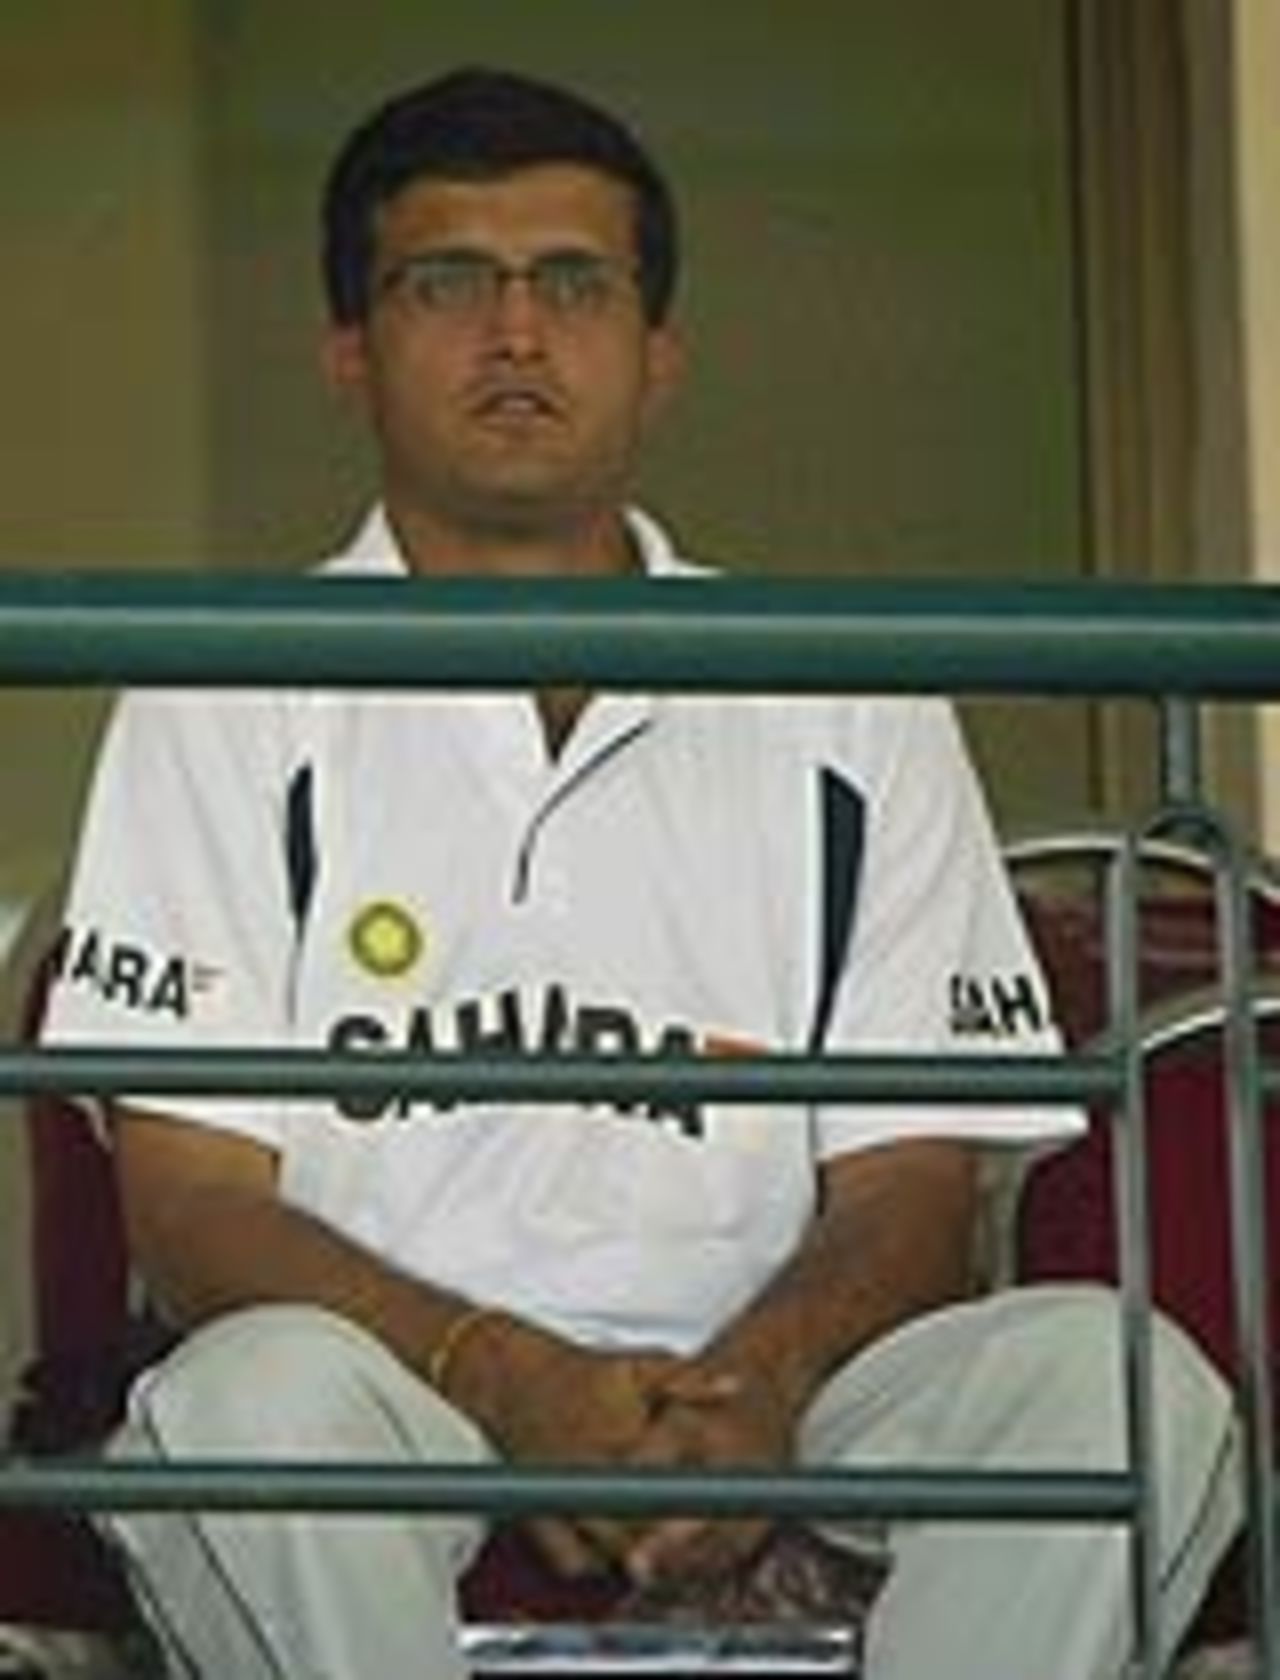 Sourav Ganguly watches from the balcony, as his team works out in the nets before the first Test between India and Pakistan at Multan, March 27, 2004